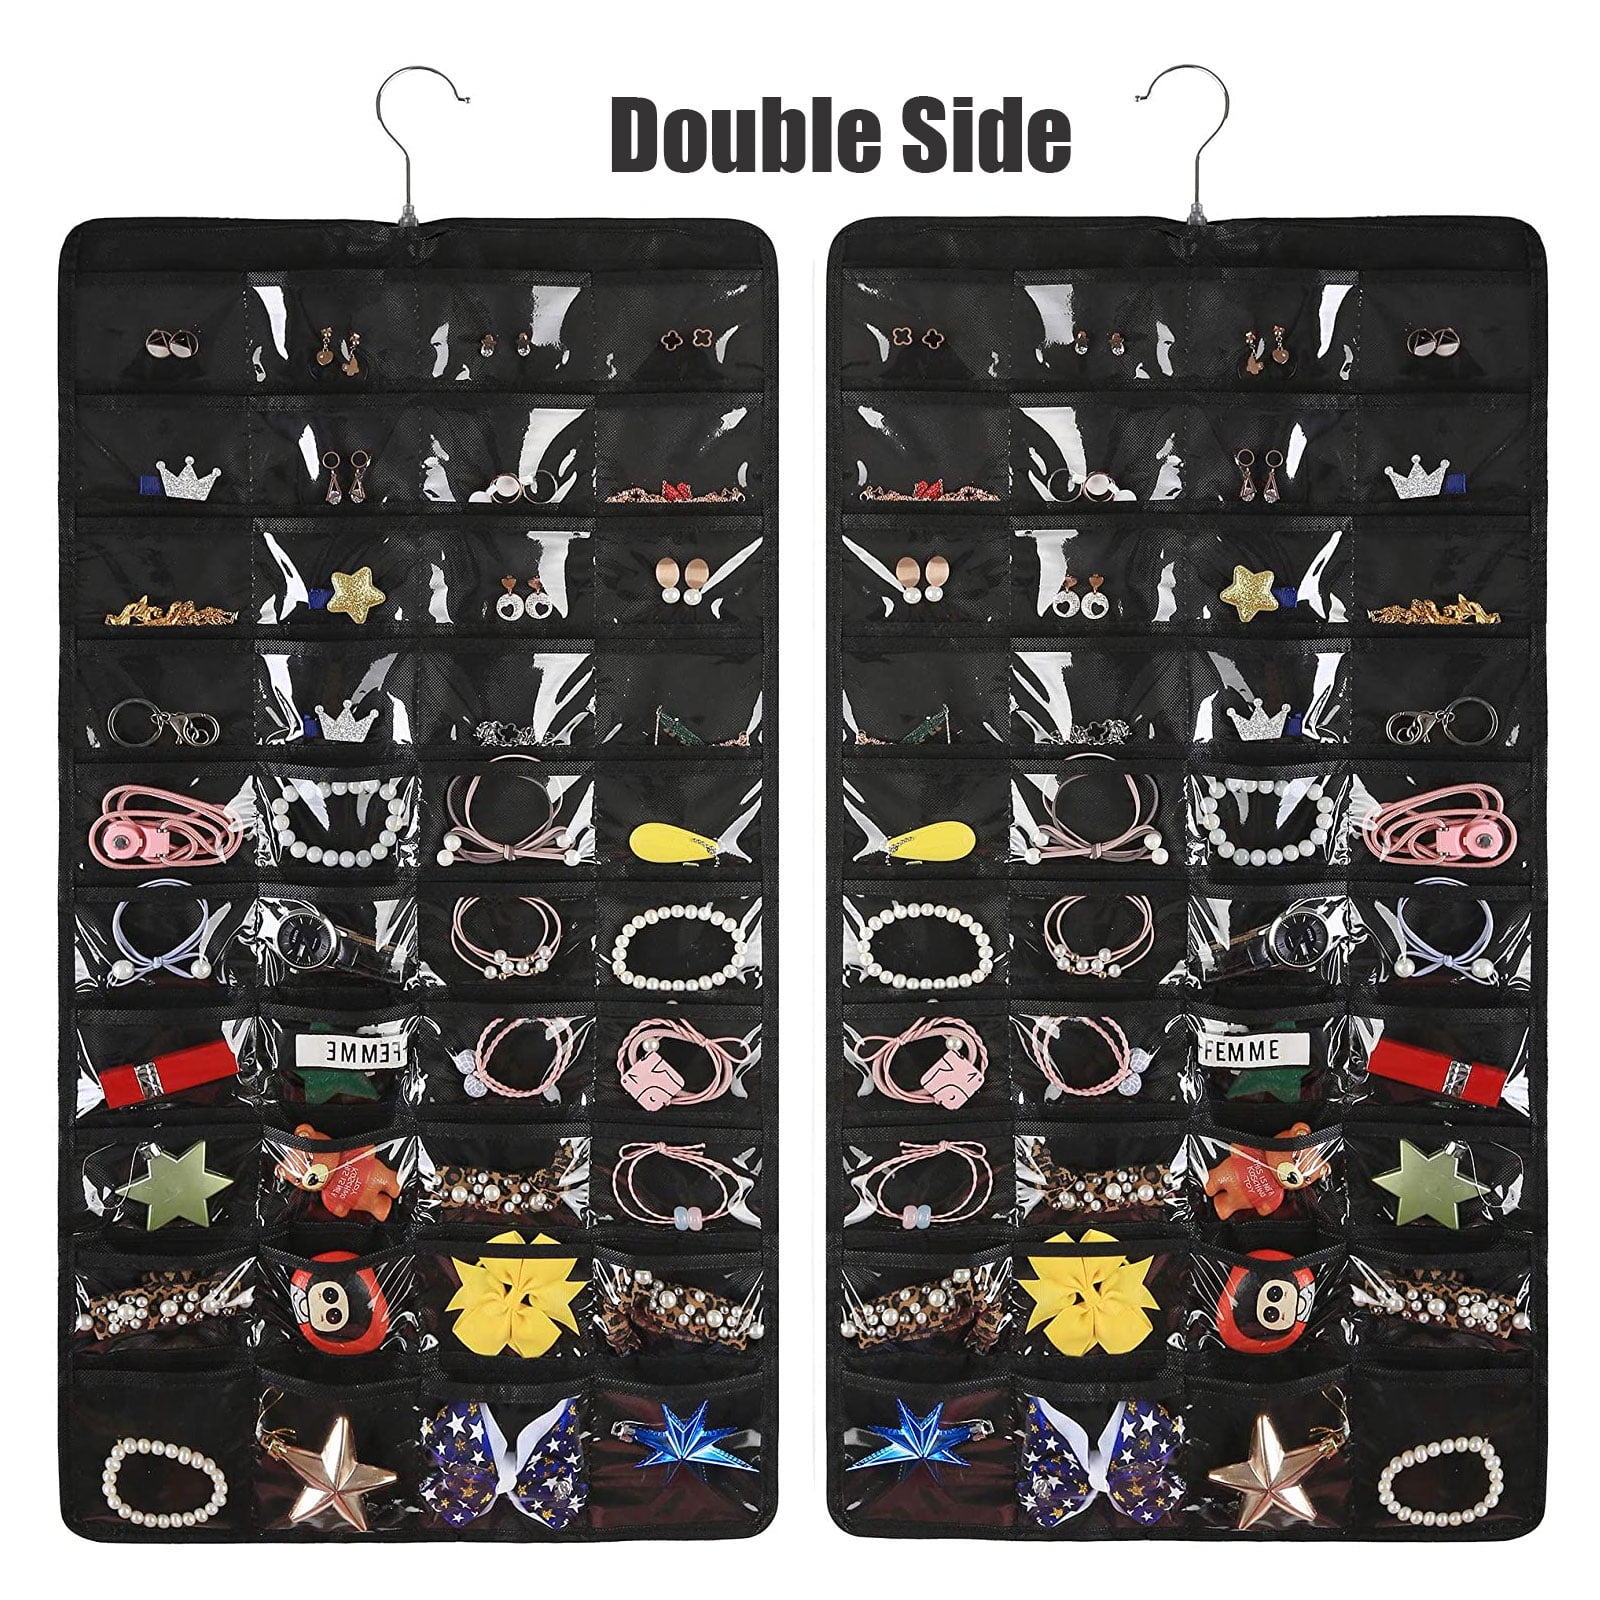 Double Side Storage 80 Pocket Hanging Jewelry Organizer Earring Display Bag 